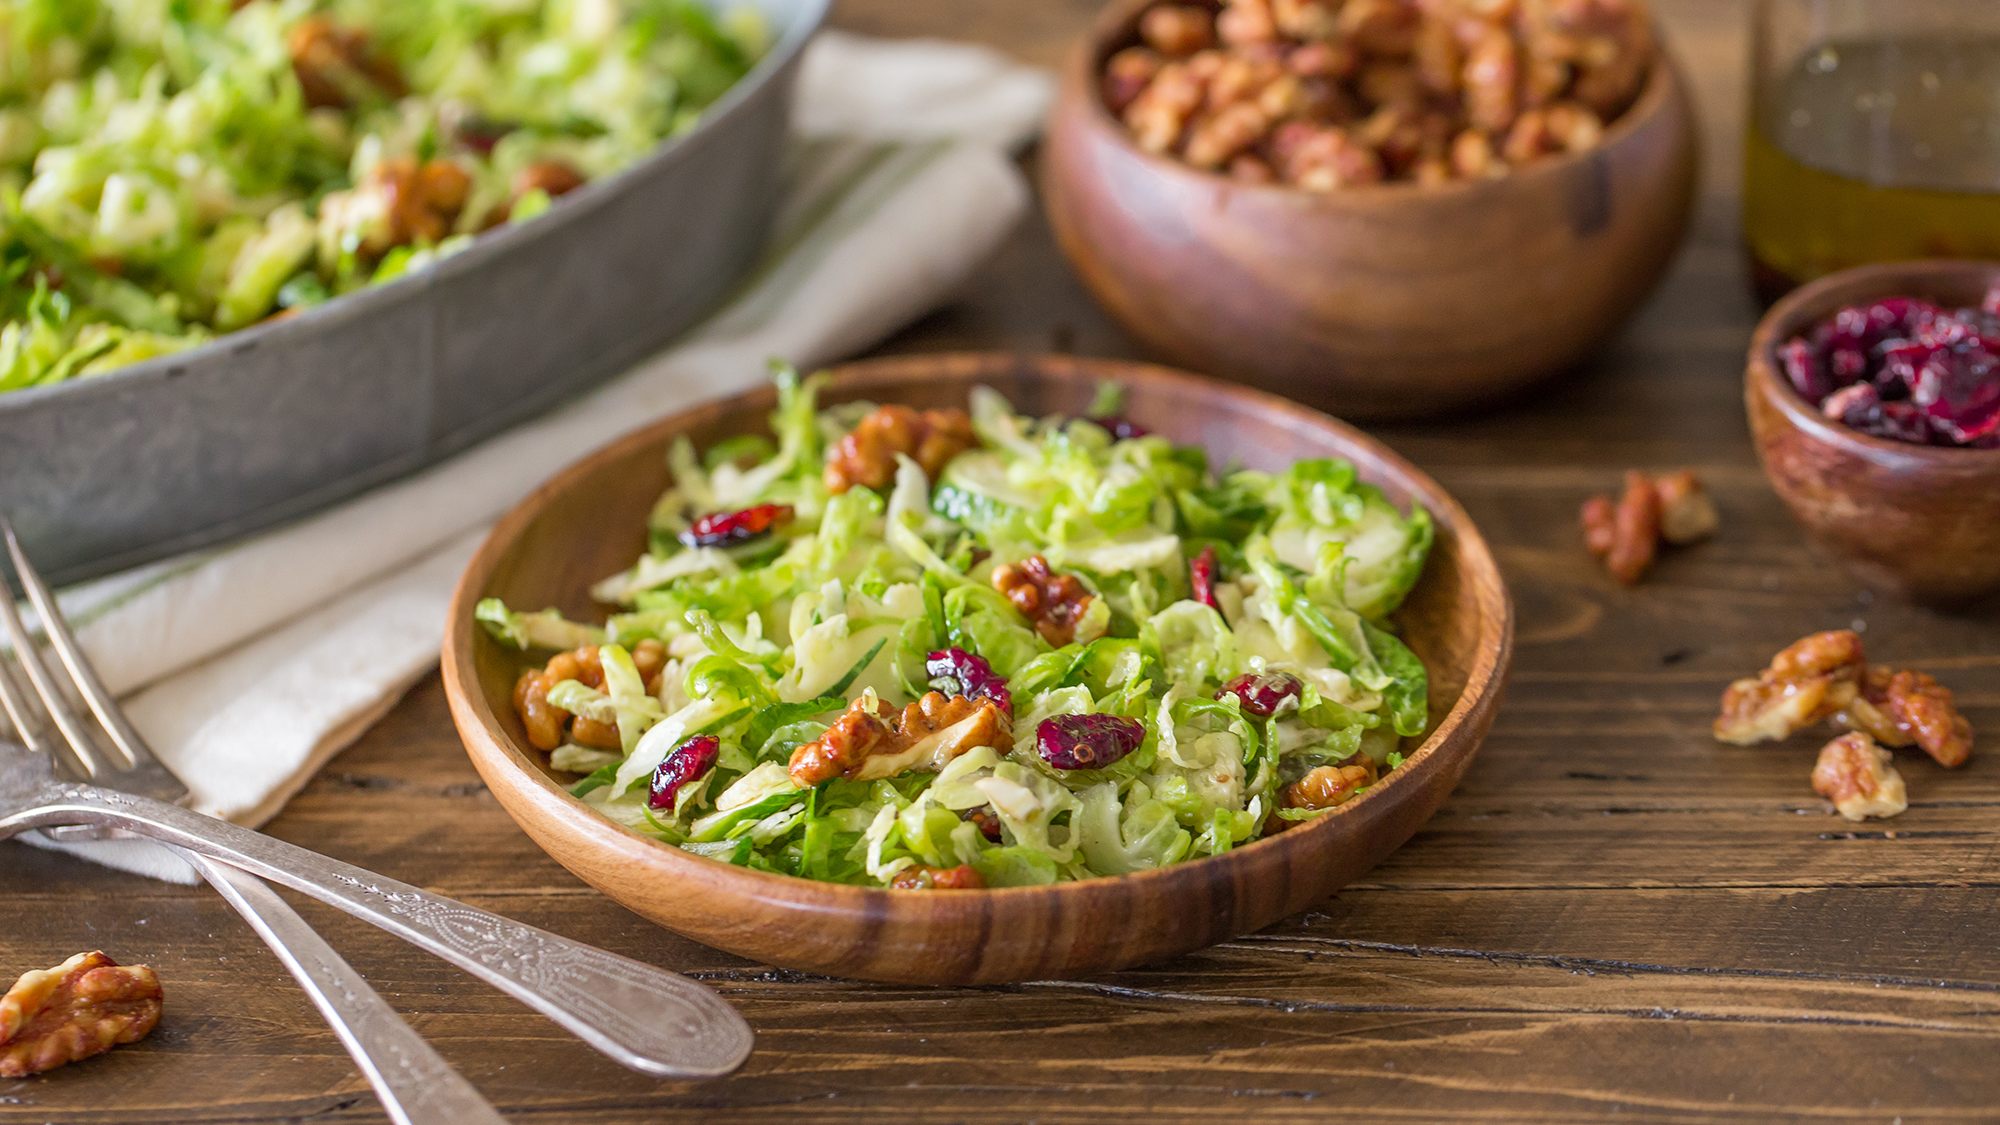 shaved-brussels-sprouts-salad-with-cranberries-and-toasted-walnuts.jpg